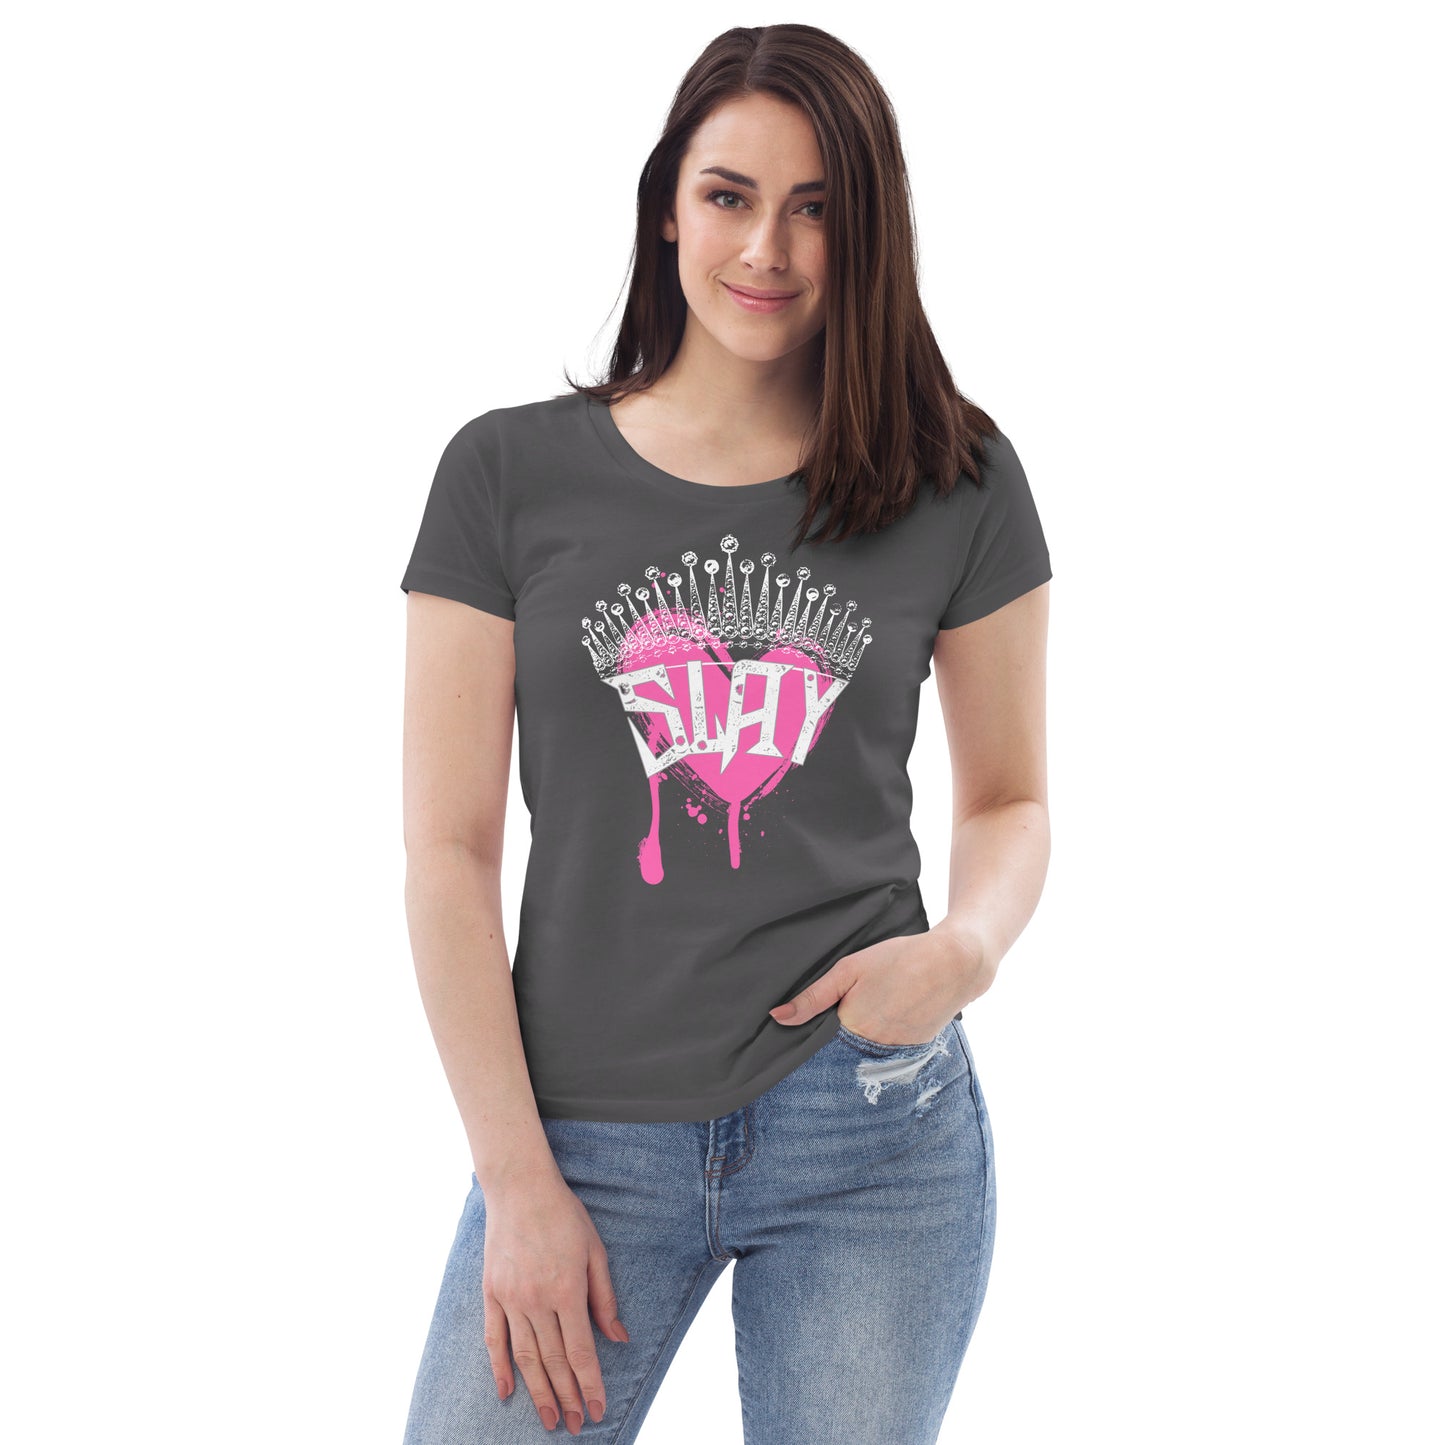 Slay Crown - Women's fitted eco tee